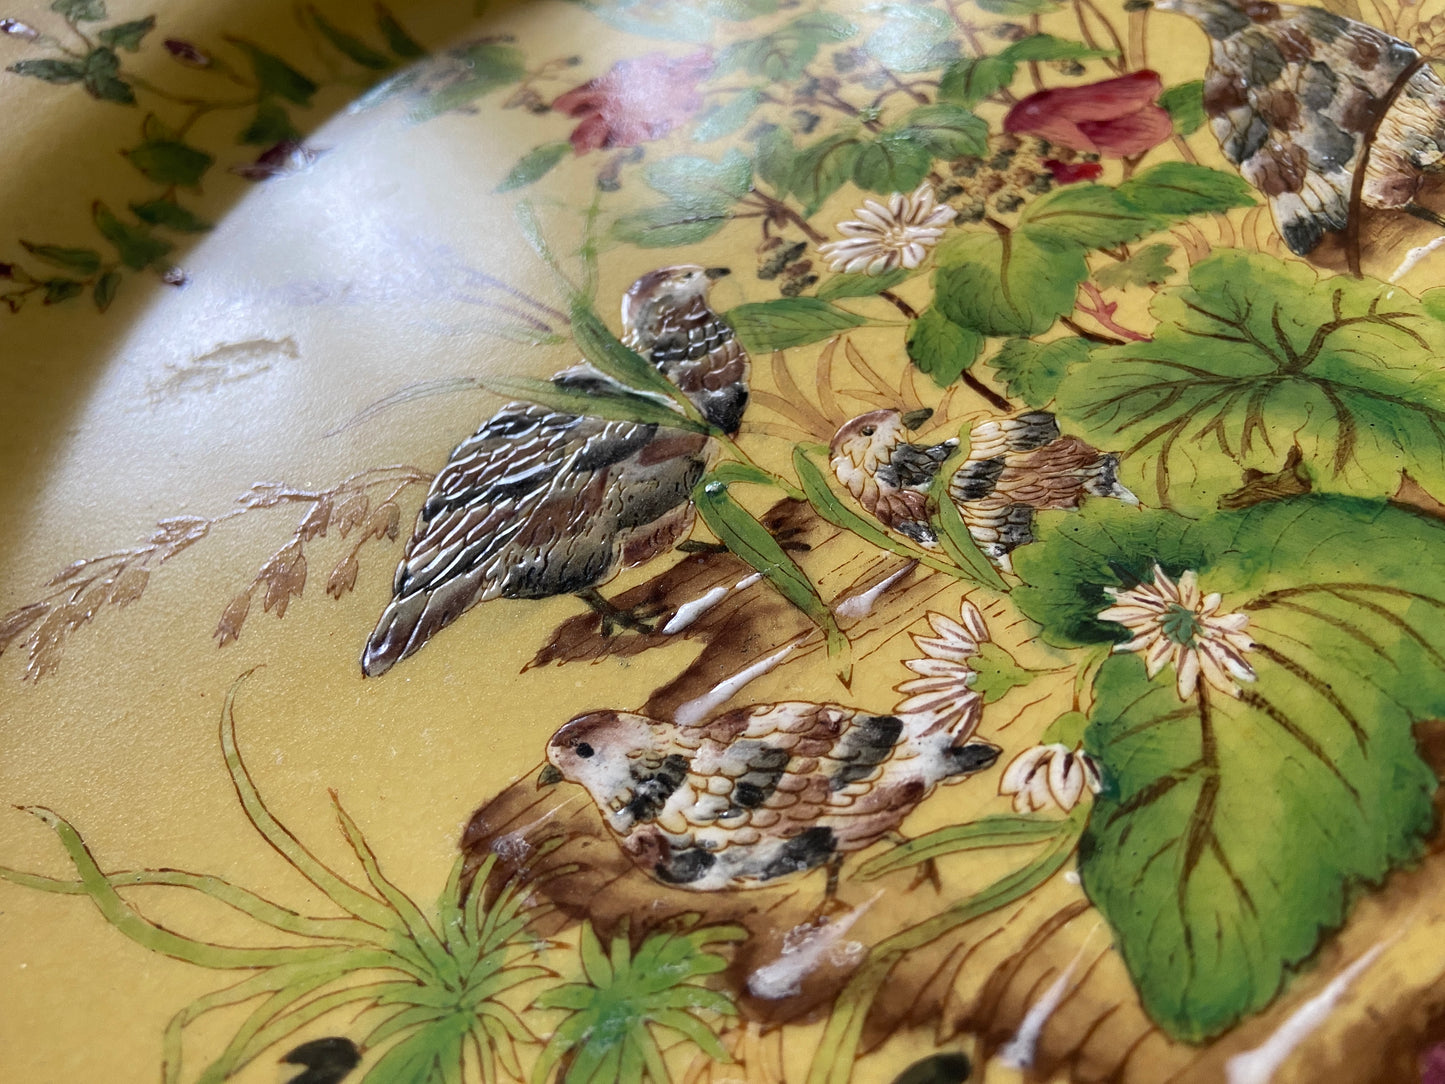 Vintage Chinoiserie Floral Porcelain Charger w/ Birds & Butterflies